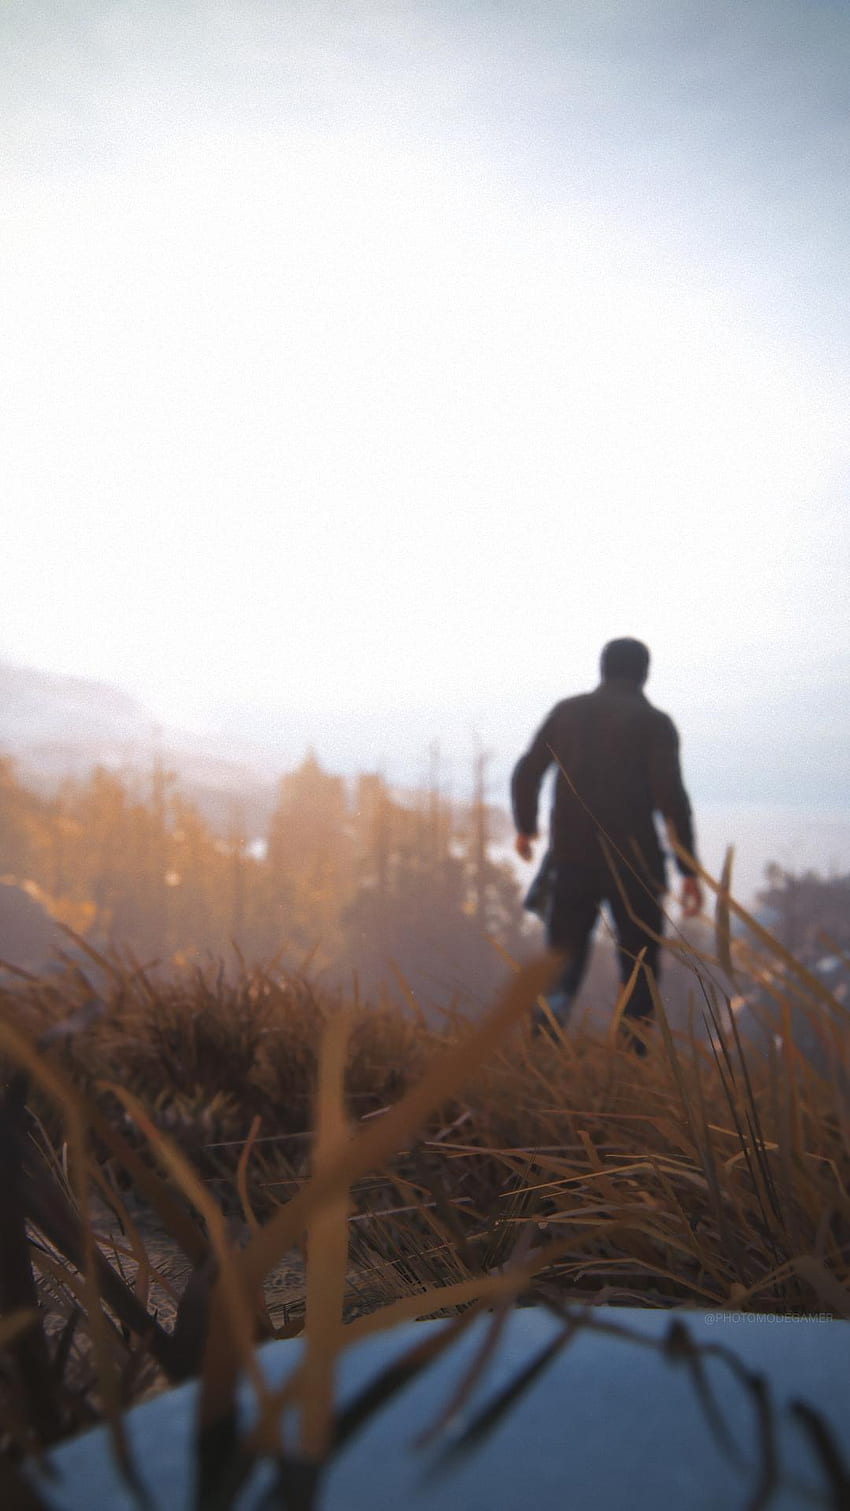 Uncharted 4 phone for anyone interested, Uncharted 4 iPhone HD phone wallpaper